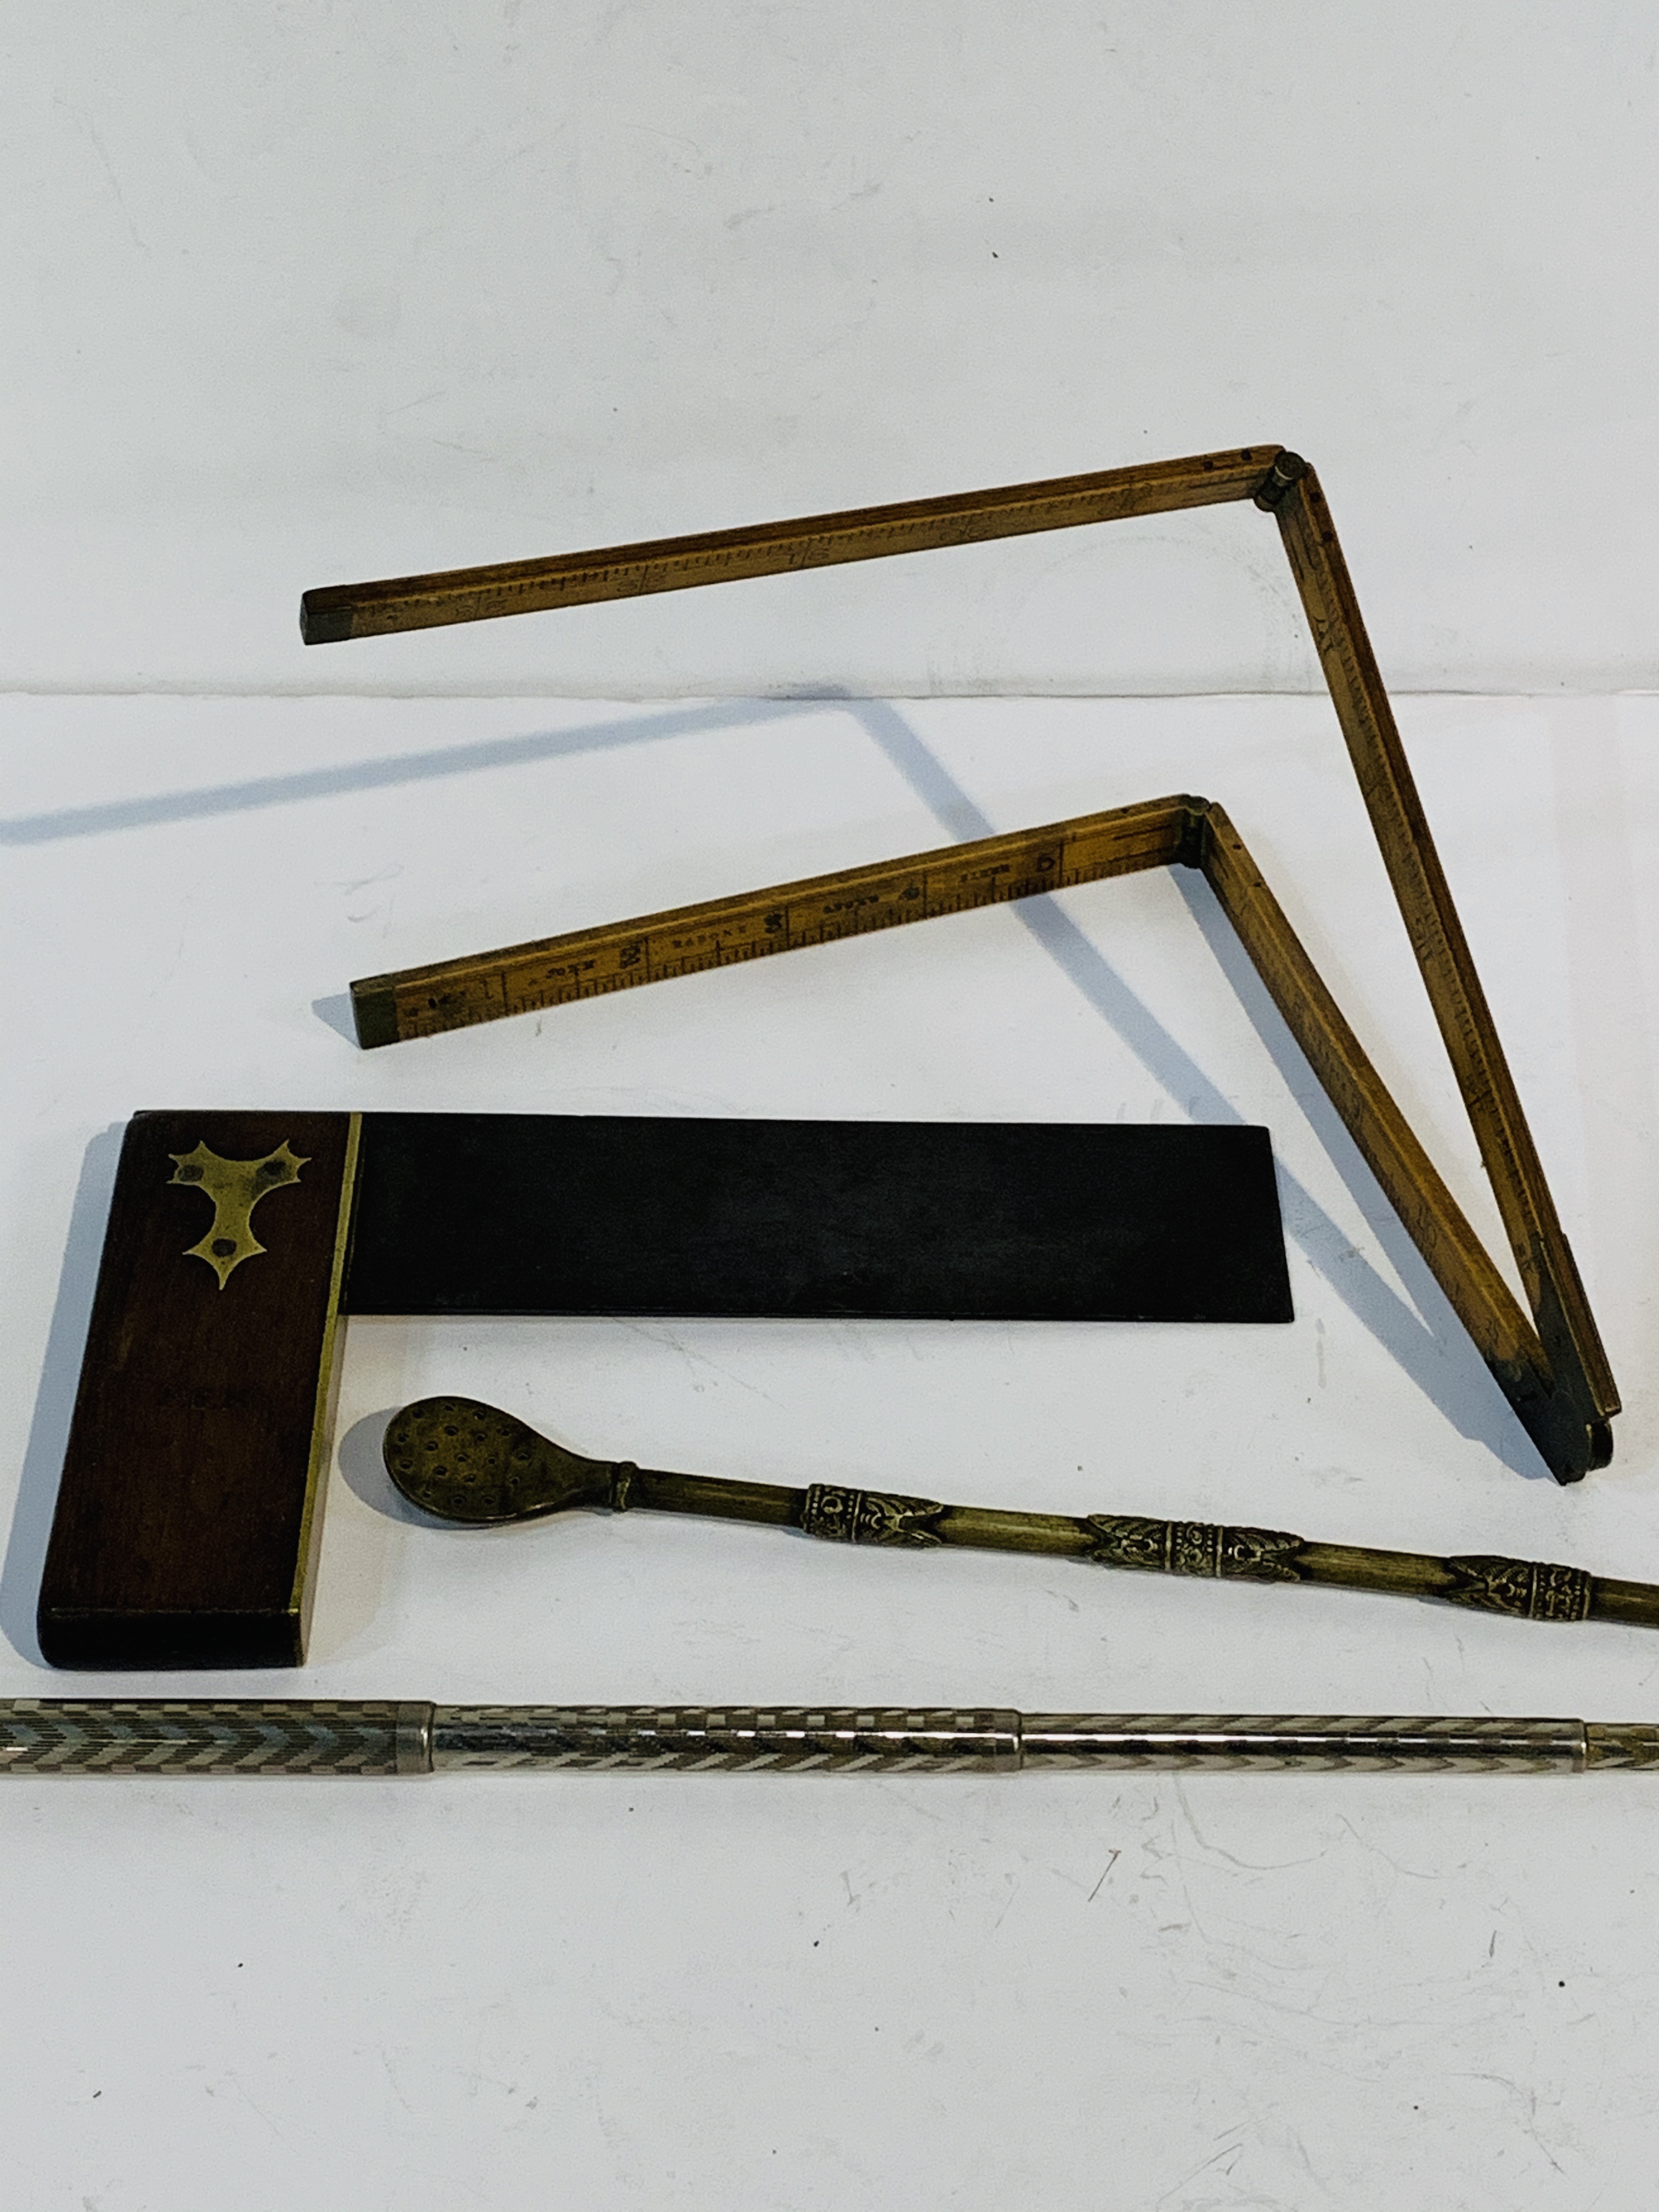 Brass bound right angle set square; boxwood 2 foot rule by Warrand; metal telescopic instrument.